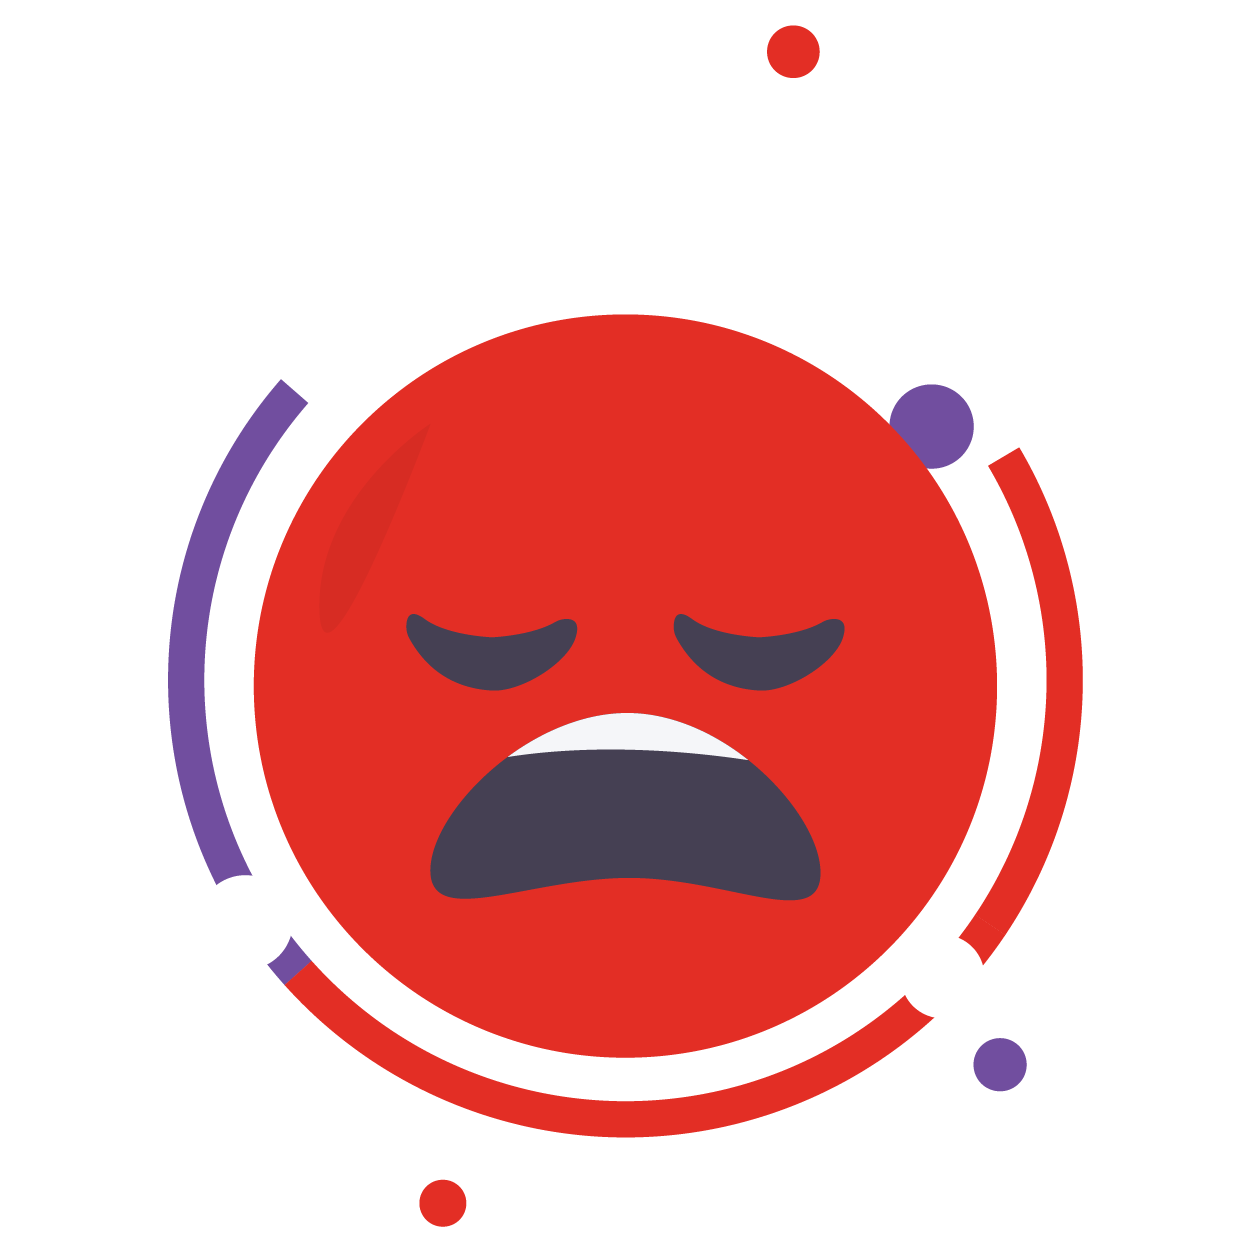 sad face icon with white details for motivational speaker topic about dealing with failure